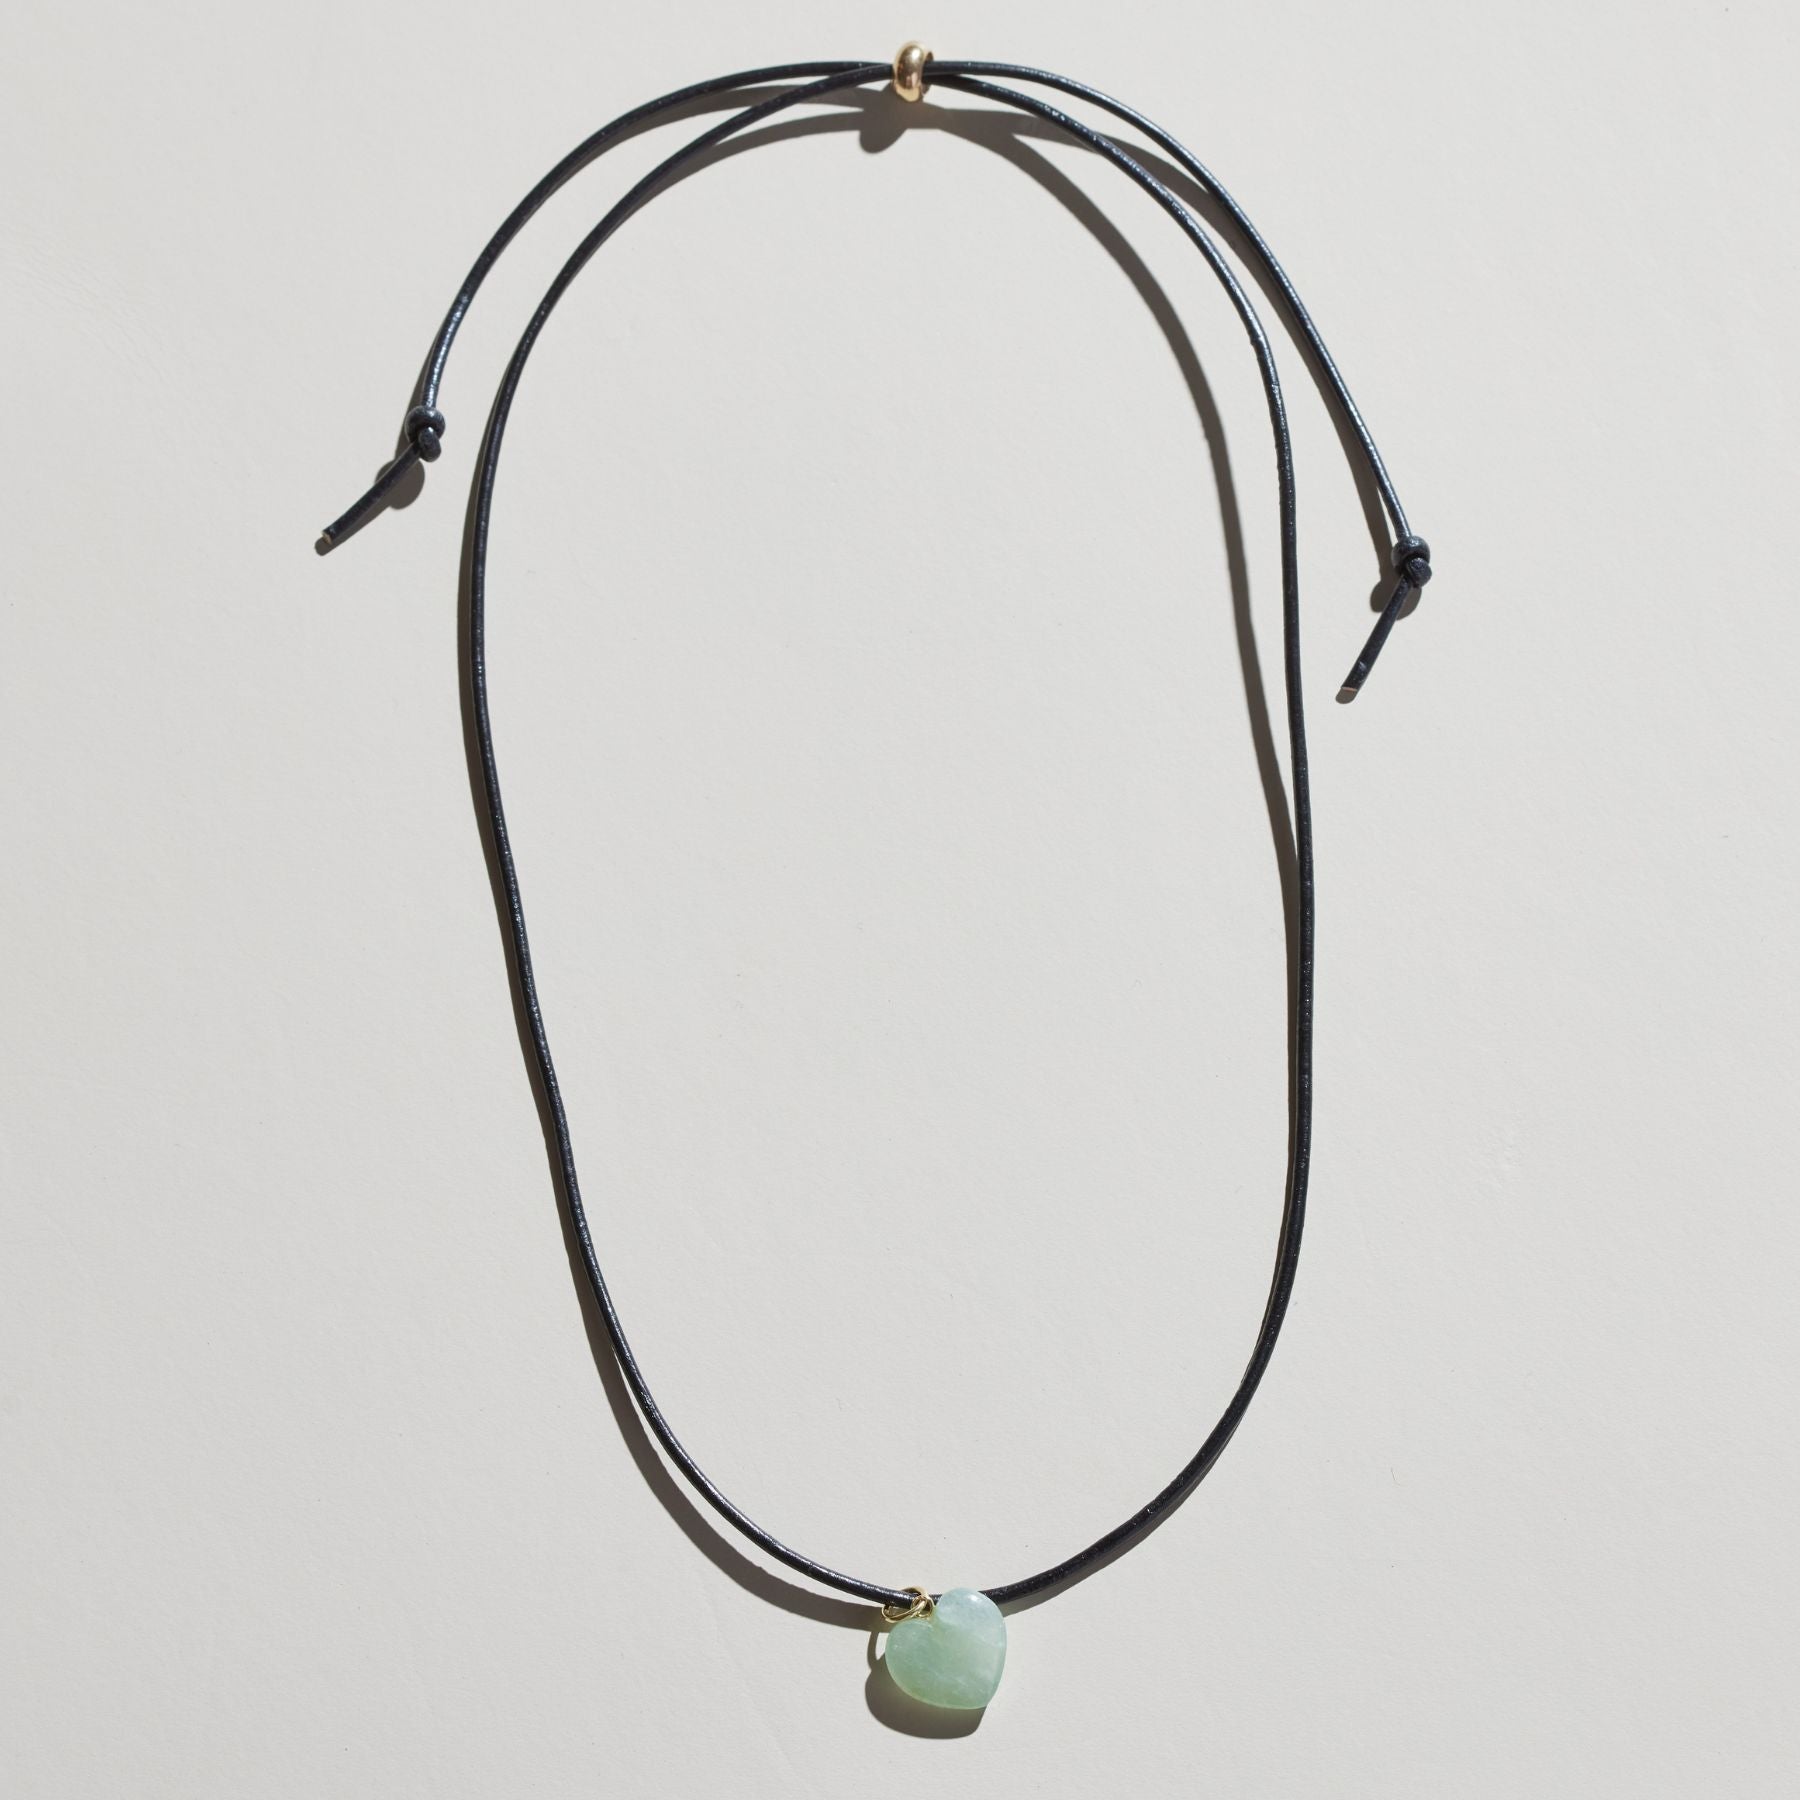 Jade Heart Charm with Leather Cord | Necklaces | Nickel & Suede One Size / Natural Cord - Nickel and Suede